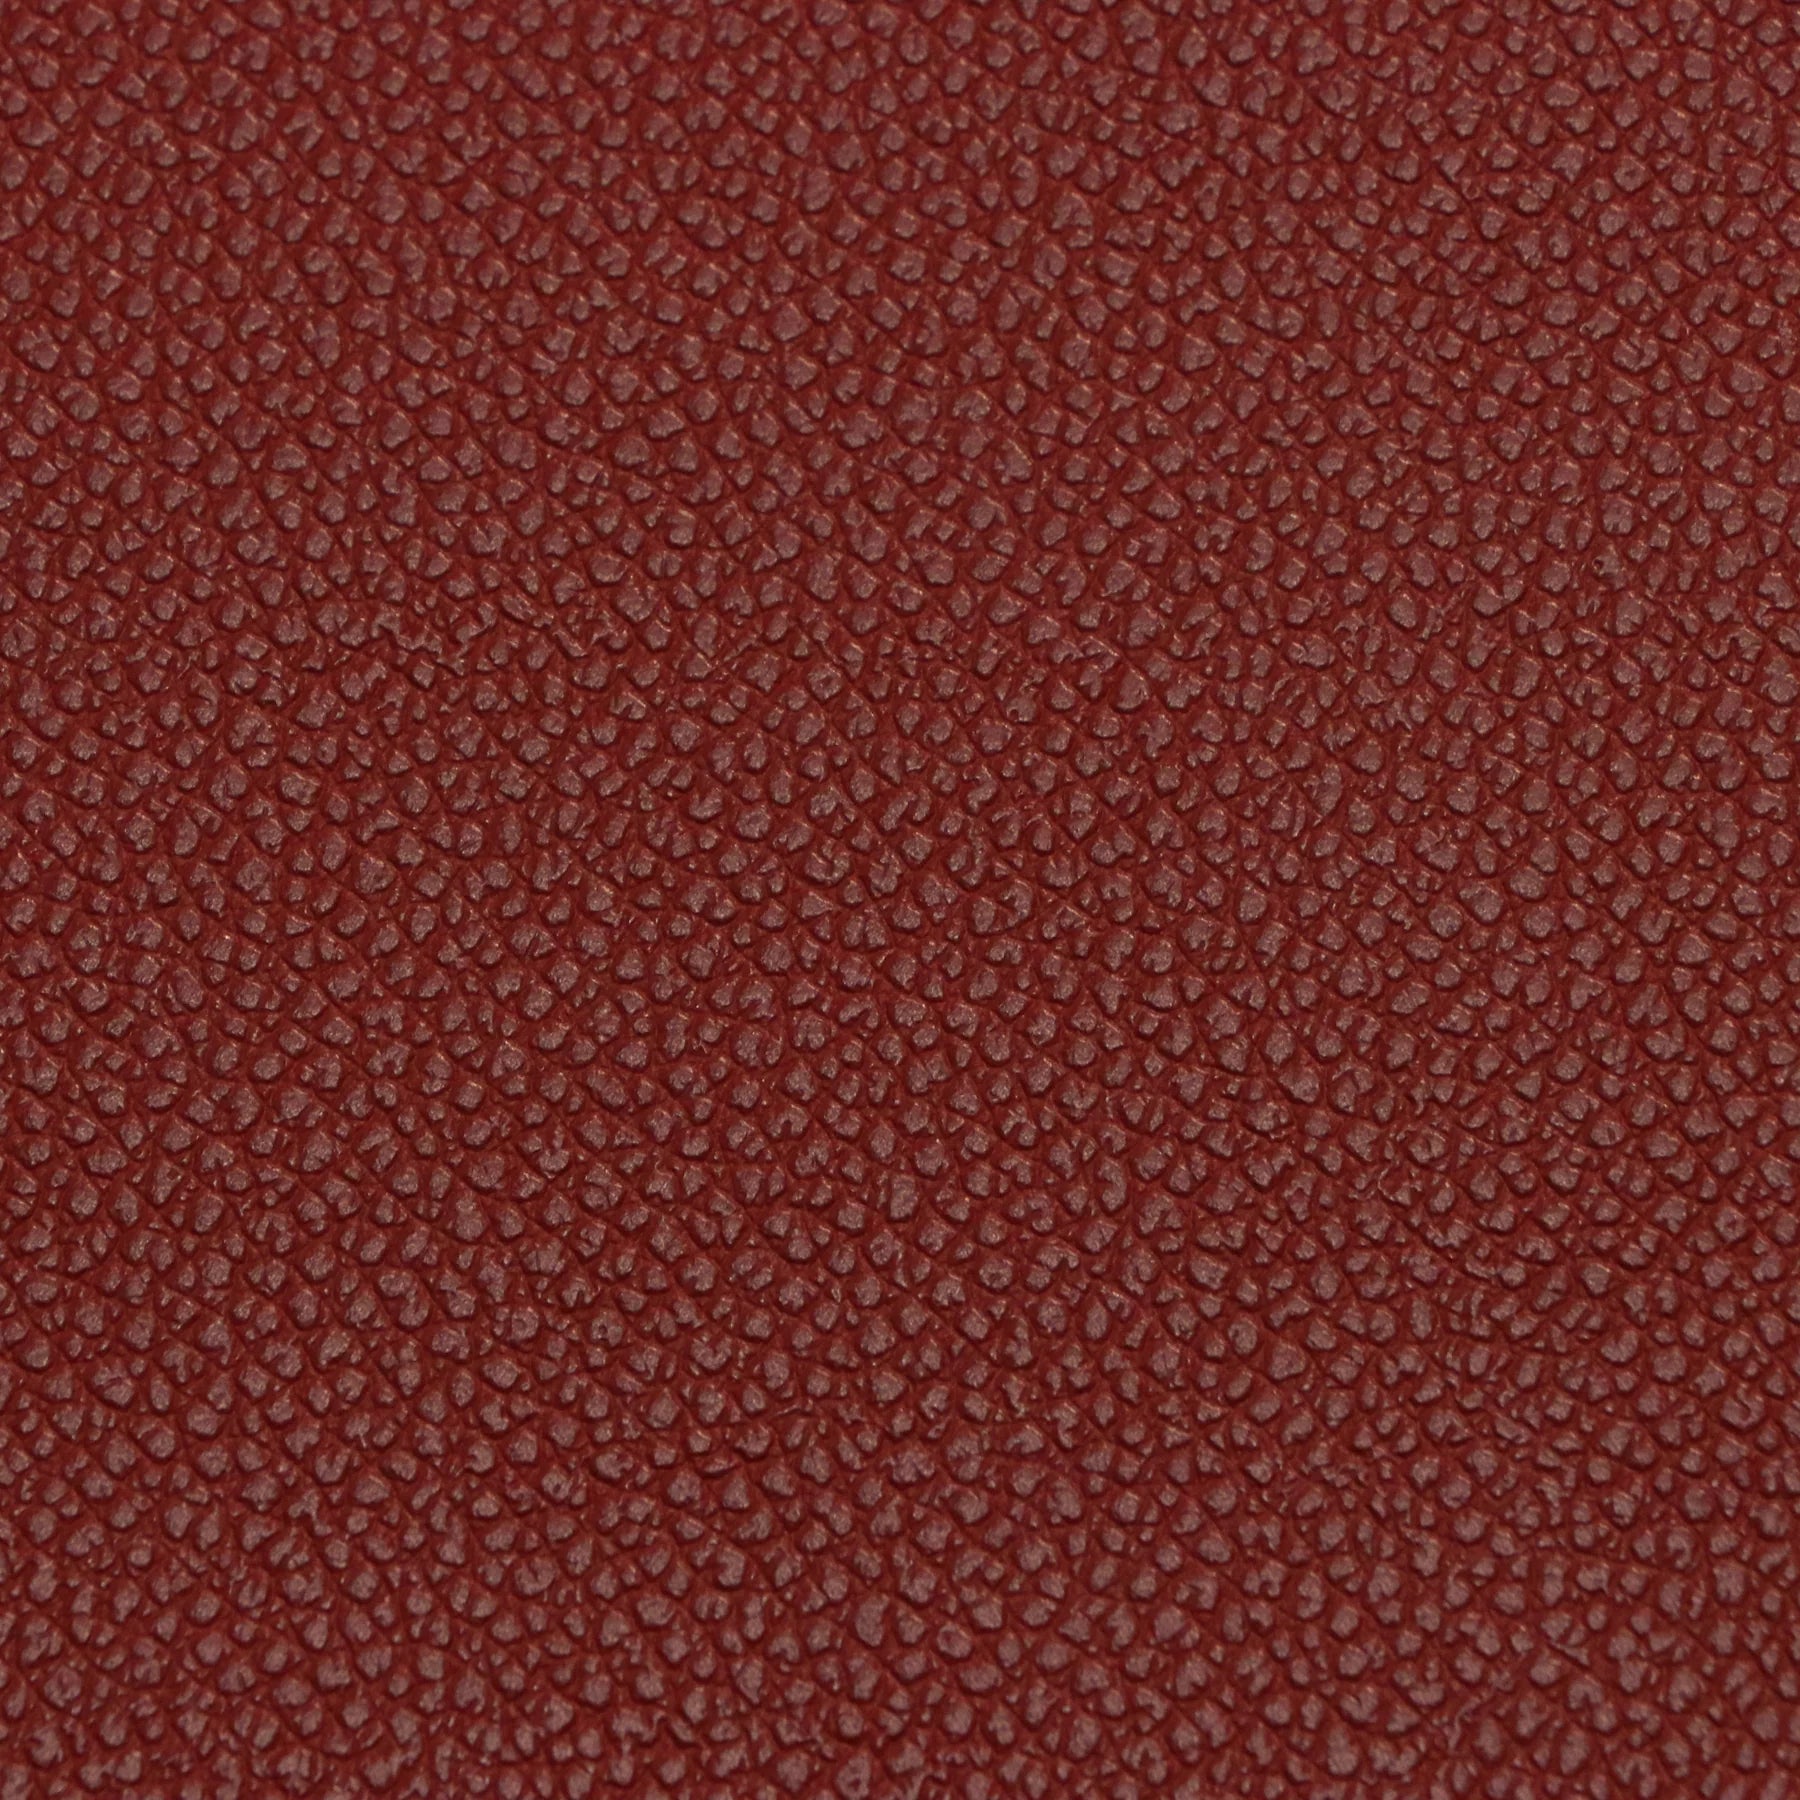 Cherry Pebble Faux Leather - Packaged 1/2 yard Cut